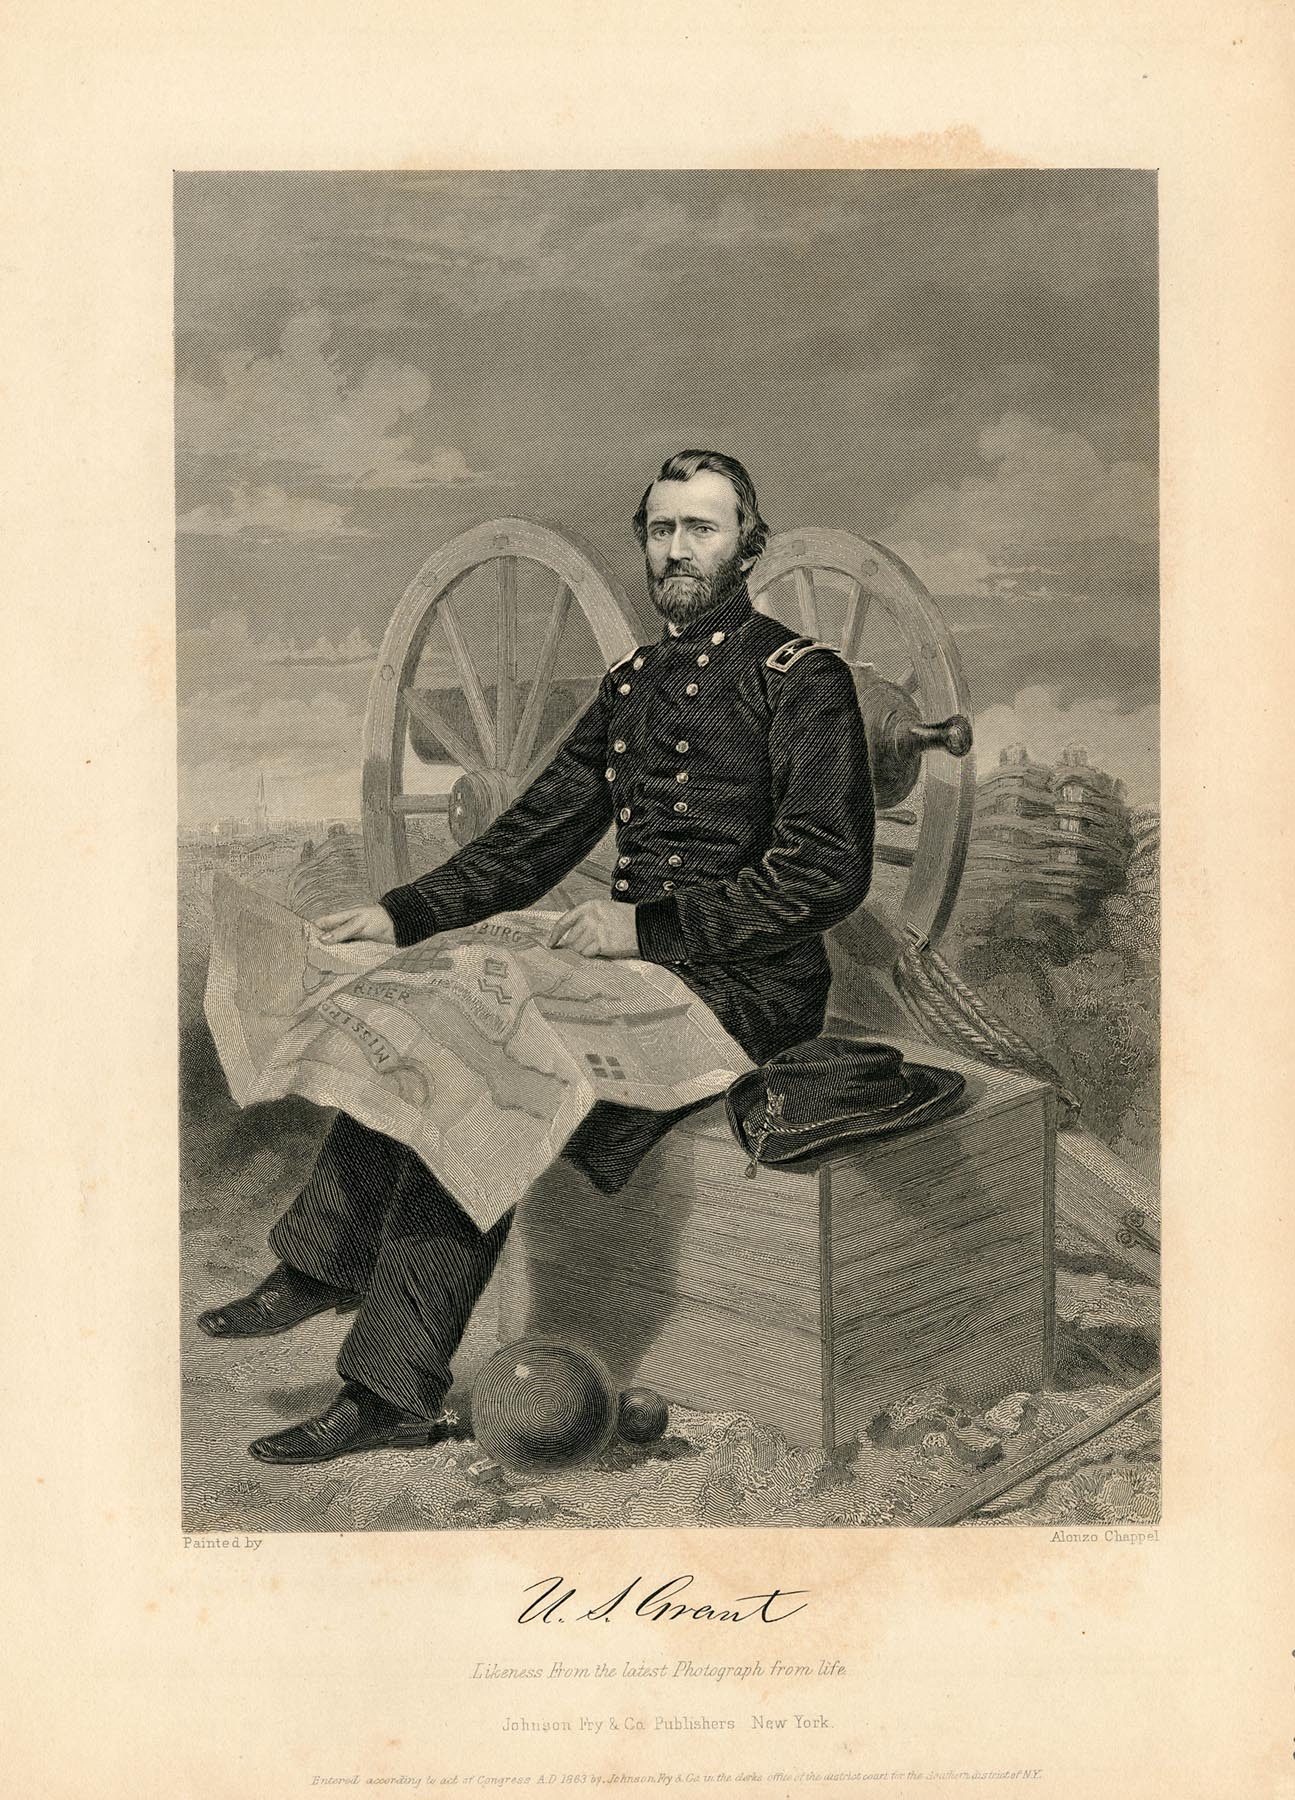 U.S. Grant, likeness from the latest photograph from life 
Johnson Fry & Co. Publishers, New York